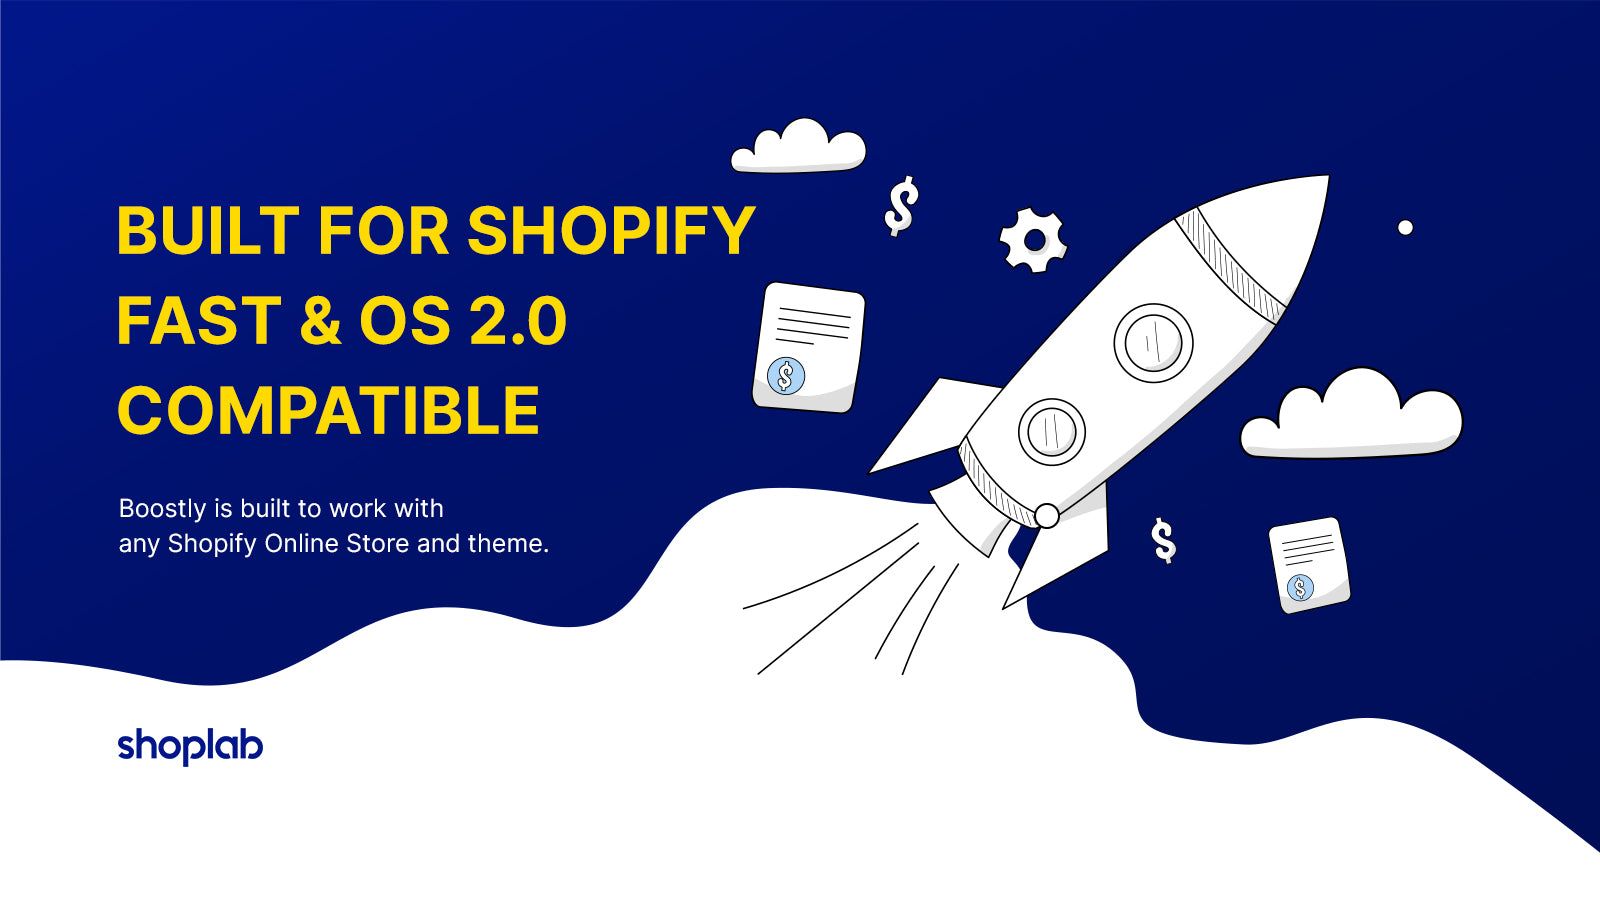 Built for Shopify, fast & OS 2.0 compatible